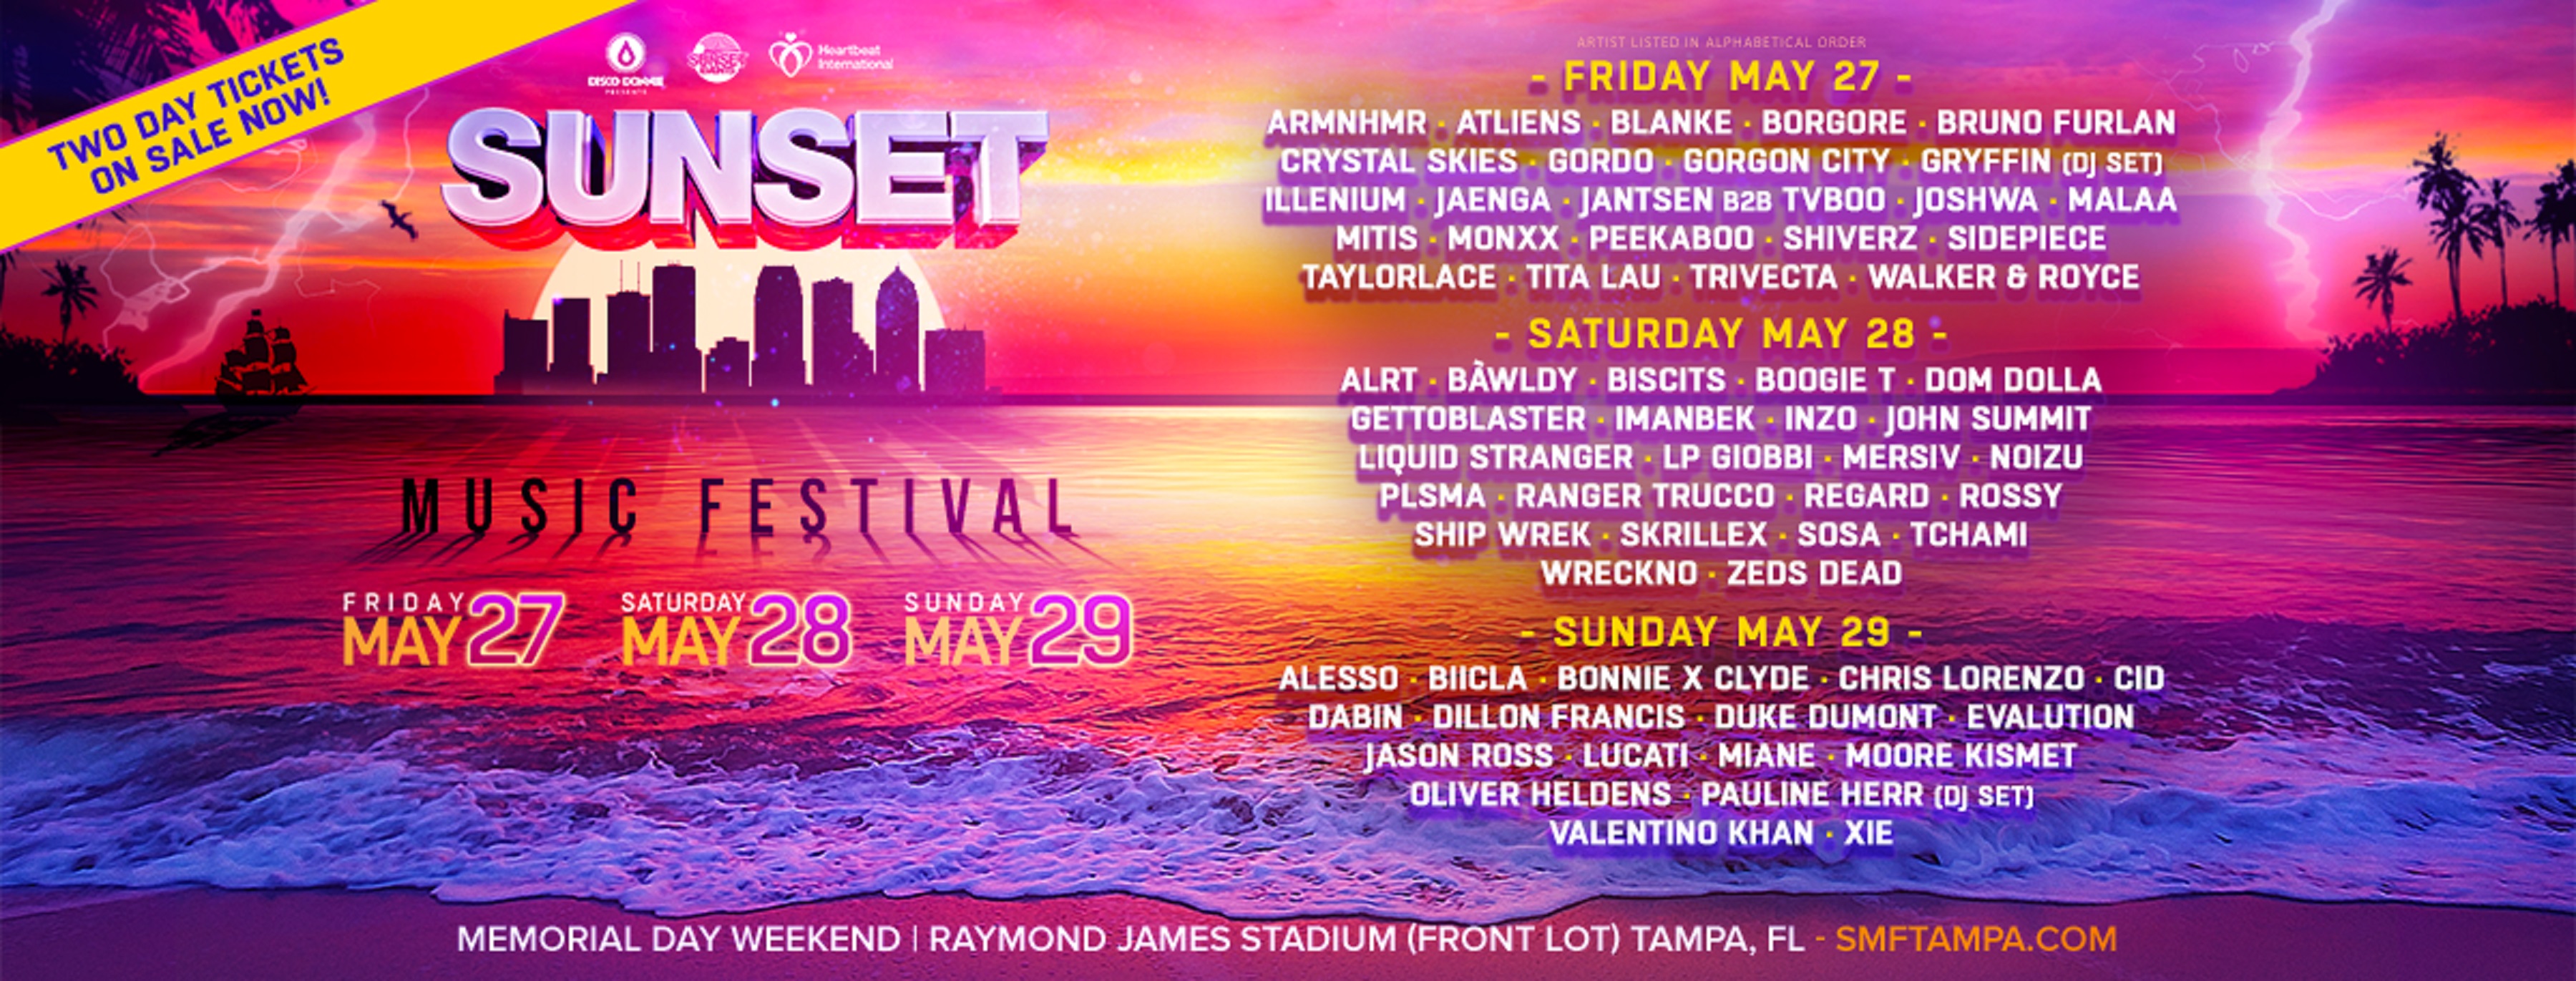 Sunset Music Fest Featuring Alesso, Skrillex, Illenium, Announces Single Day Lineup, 2 Day Tickets On Sale now Memorial Day Weekend